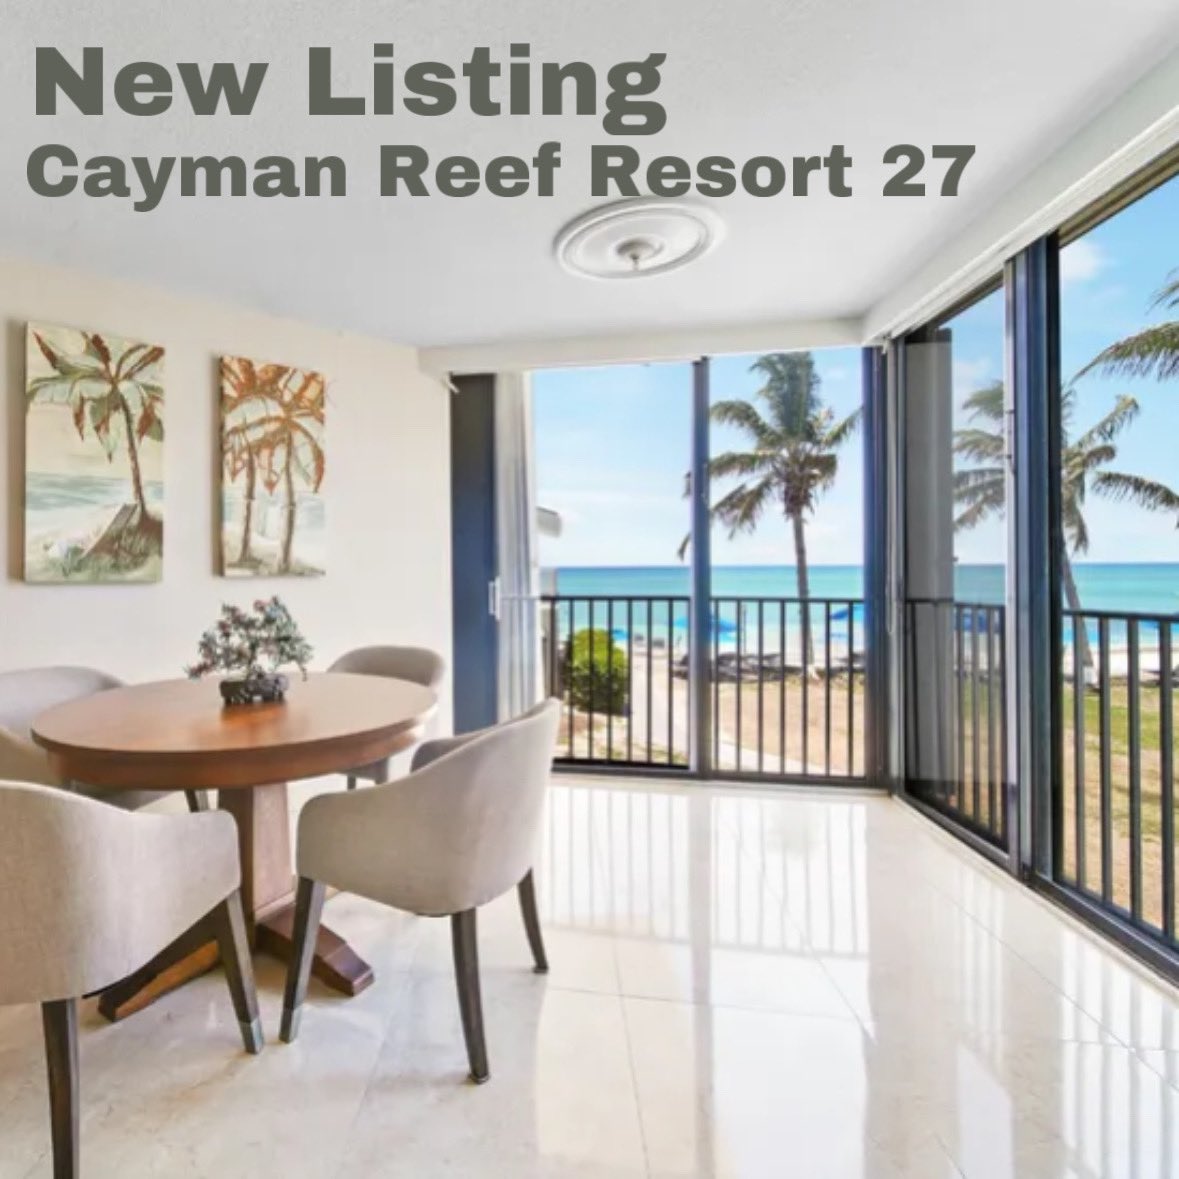 Cayman Reef Resort

Discover your Island paradise with this 3bdrm beachfront condo

Steps from the sand & located along Seven Mile Beach

Member of CIREBA
MLS # 417623

#NewListing #Caribbean #Condo #Scuba #Snorkel 
#CaymanRealEstate #caymansothebysrealty #caymanislandsrealestate